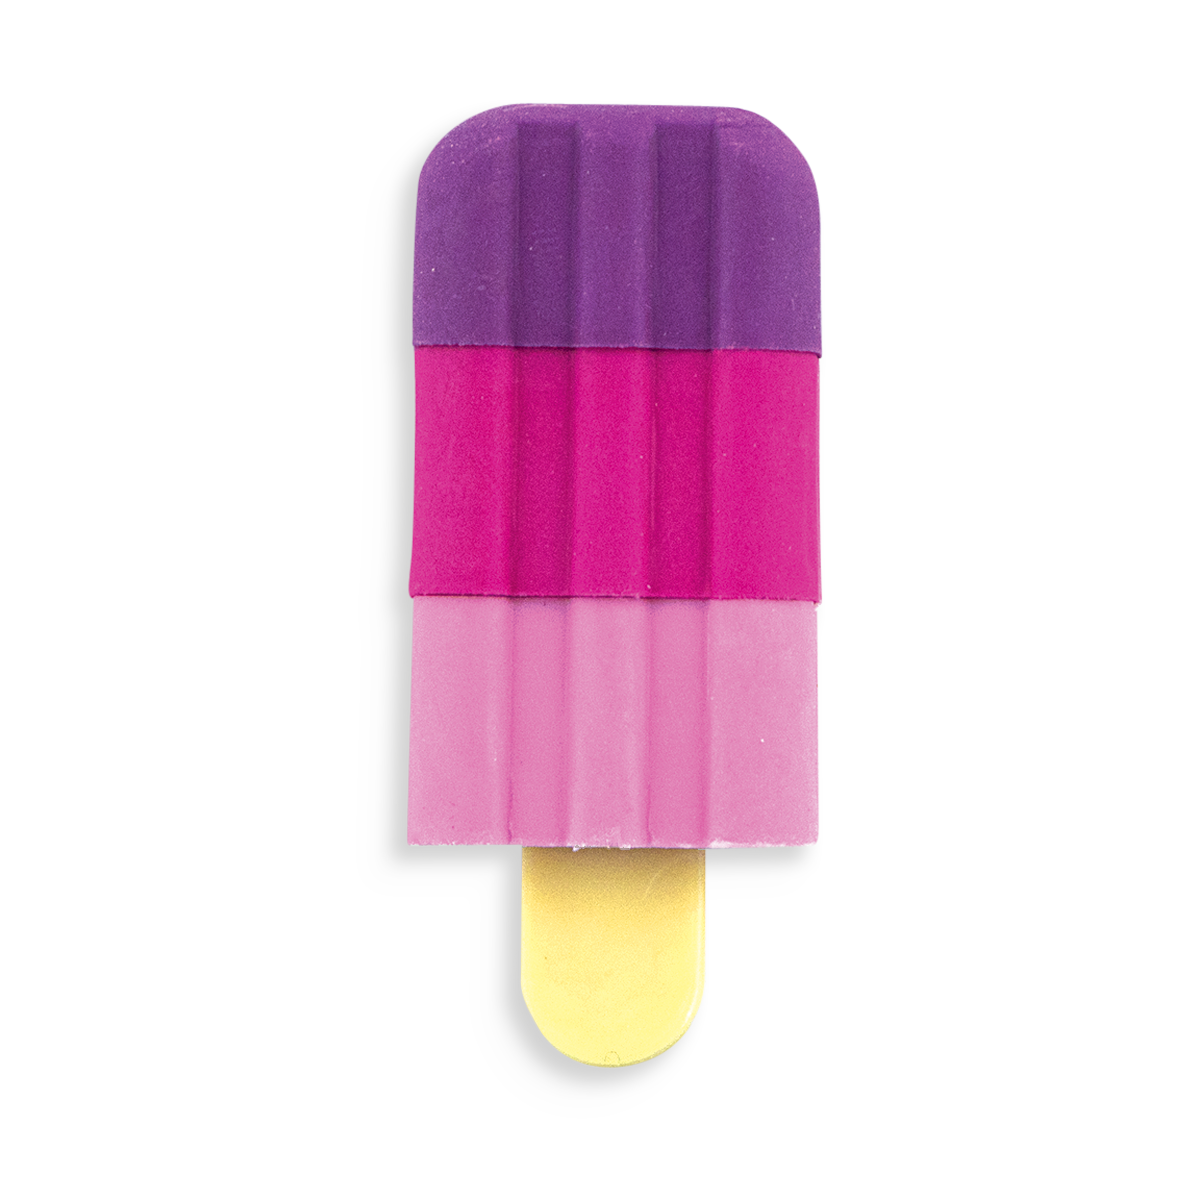 Icy Pops Scented Erasers: Playable erasers that look, smell like popsicles.